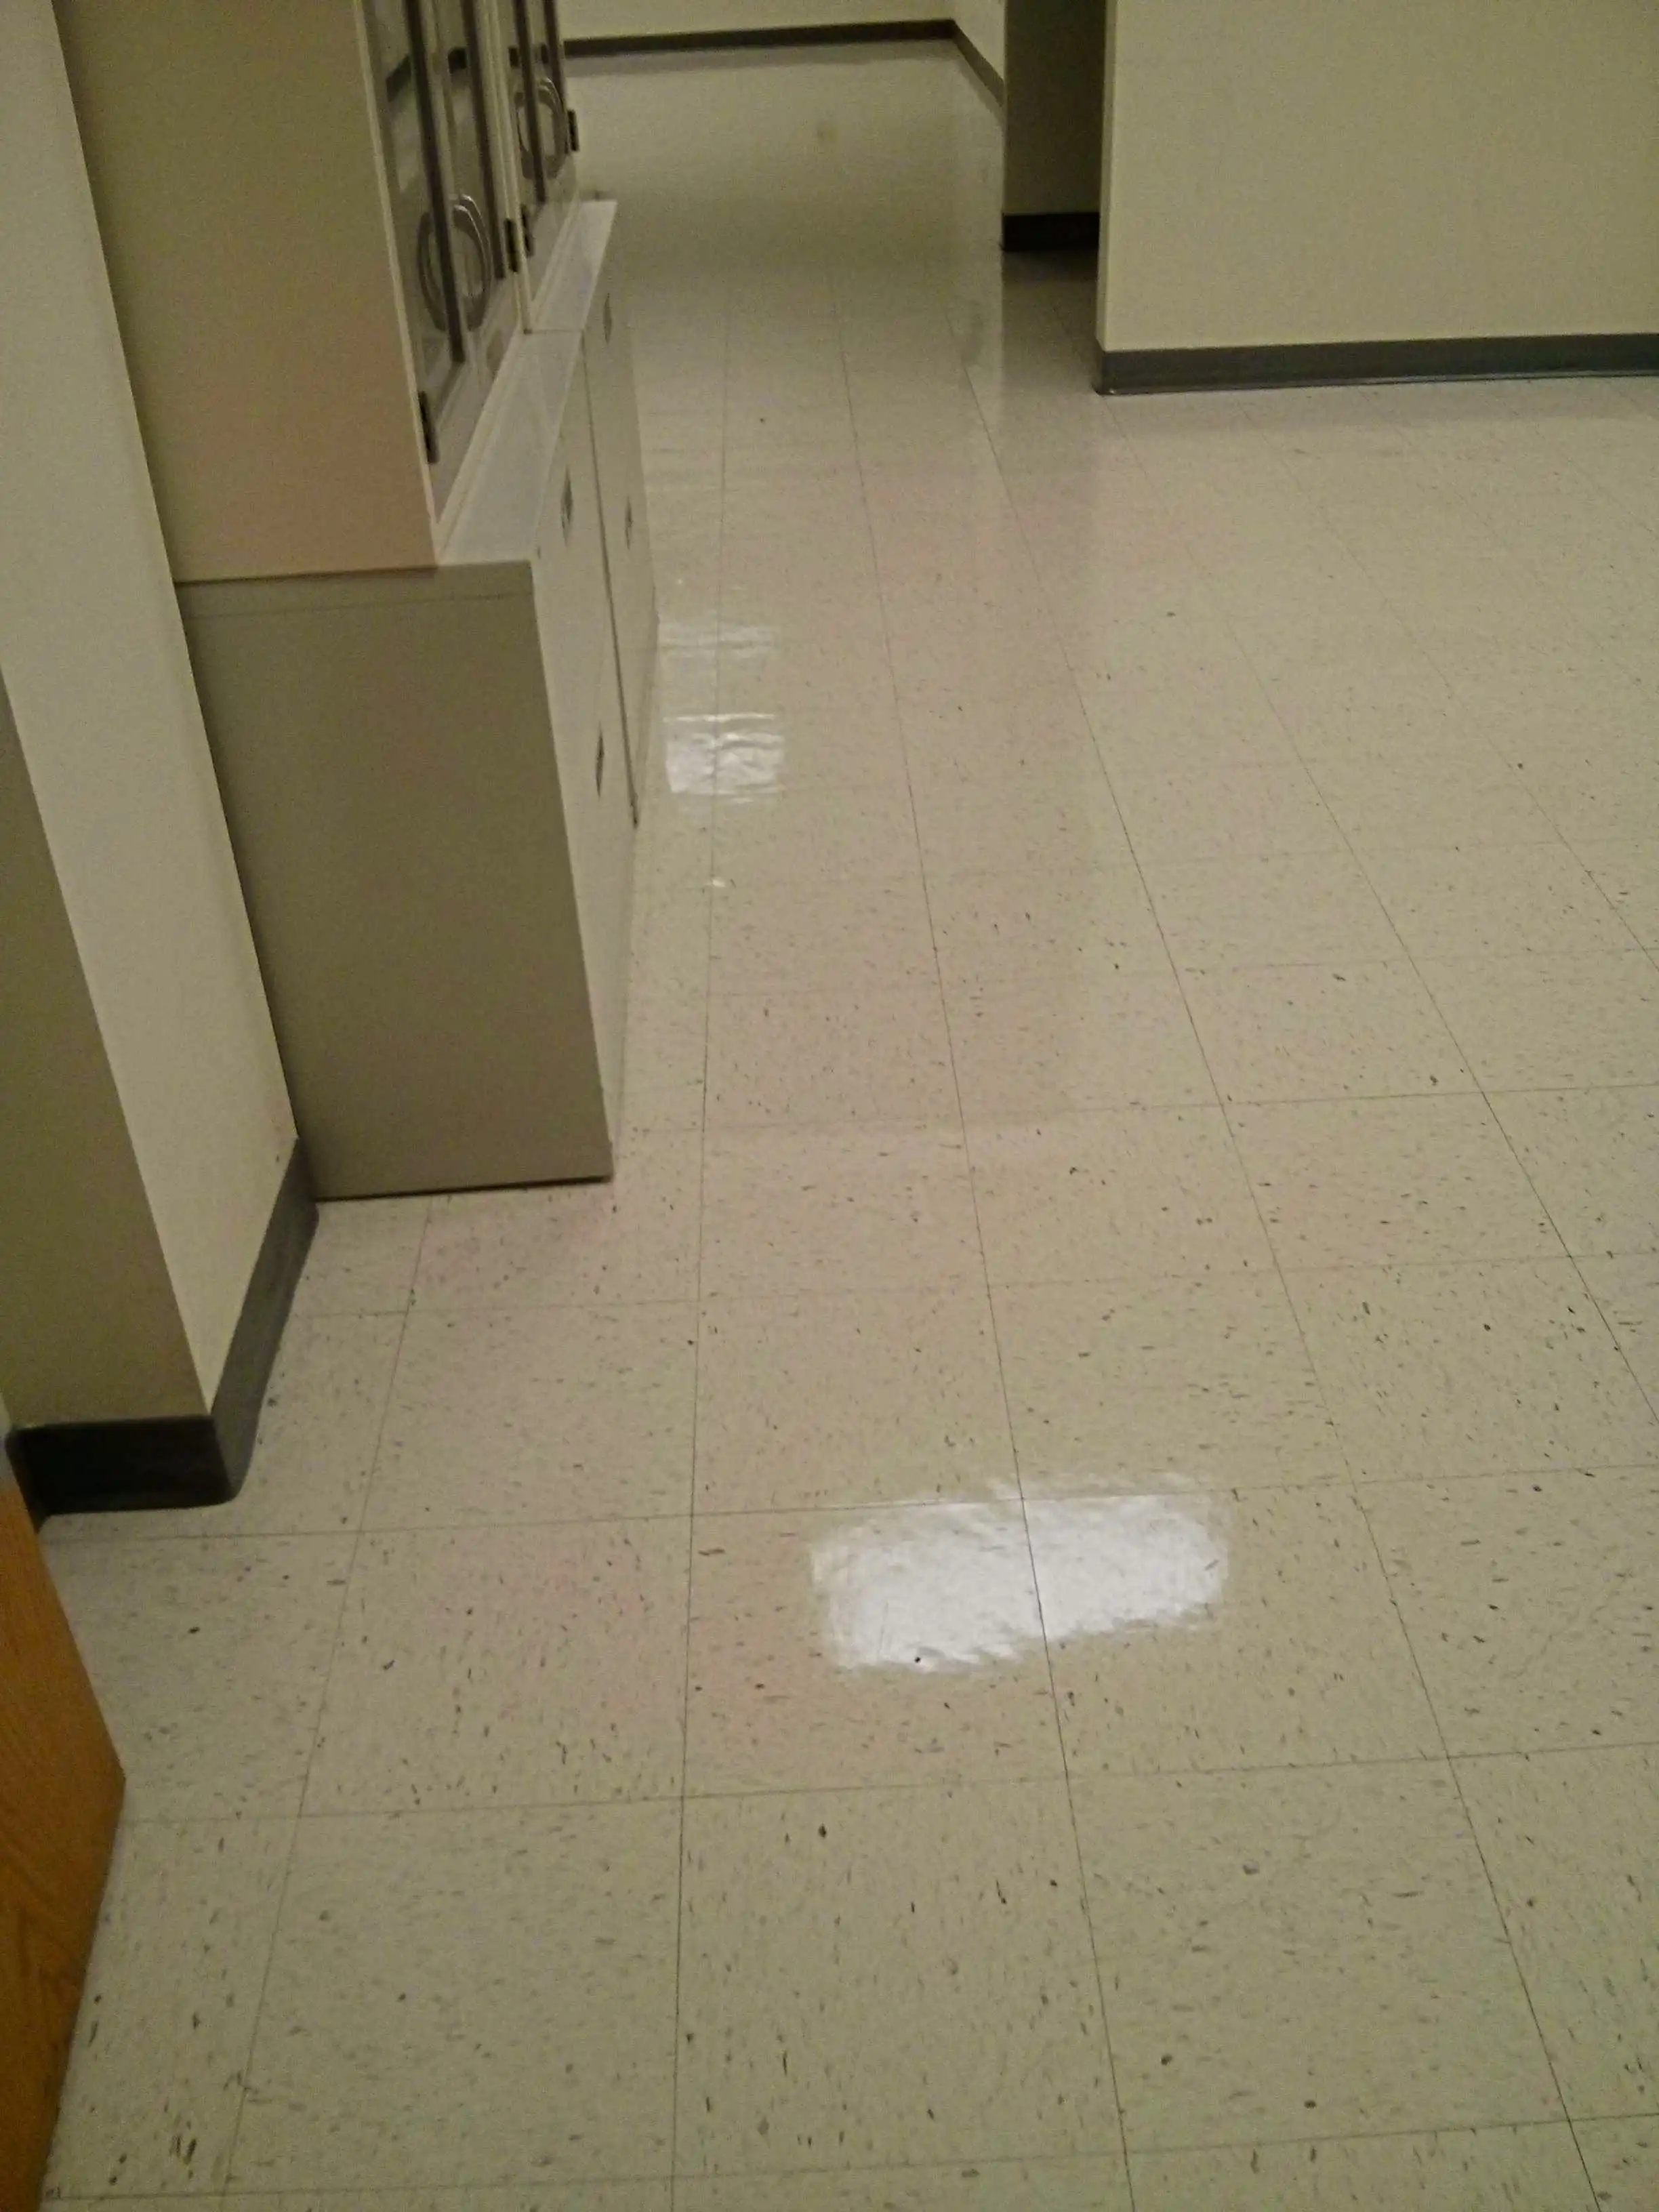 vct-floor-coatings-services-in-minneapolis-medical-manufacturing-facility